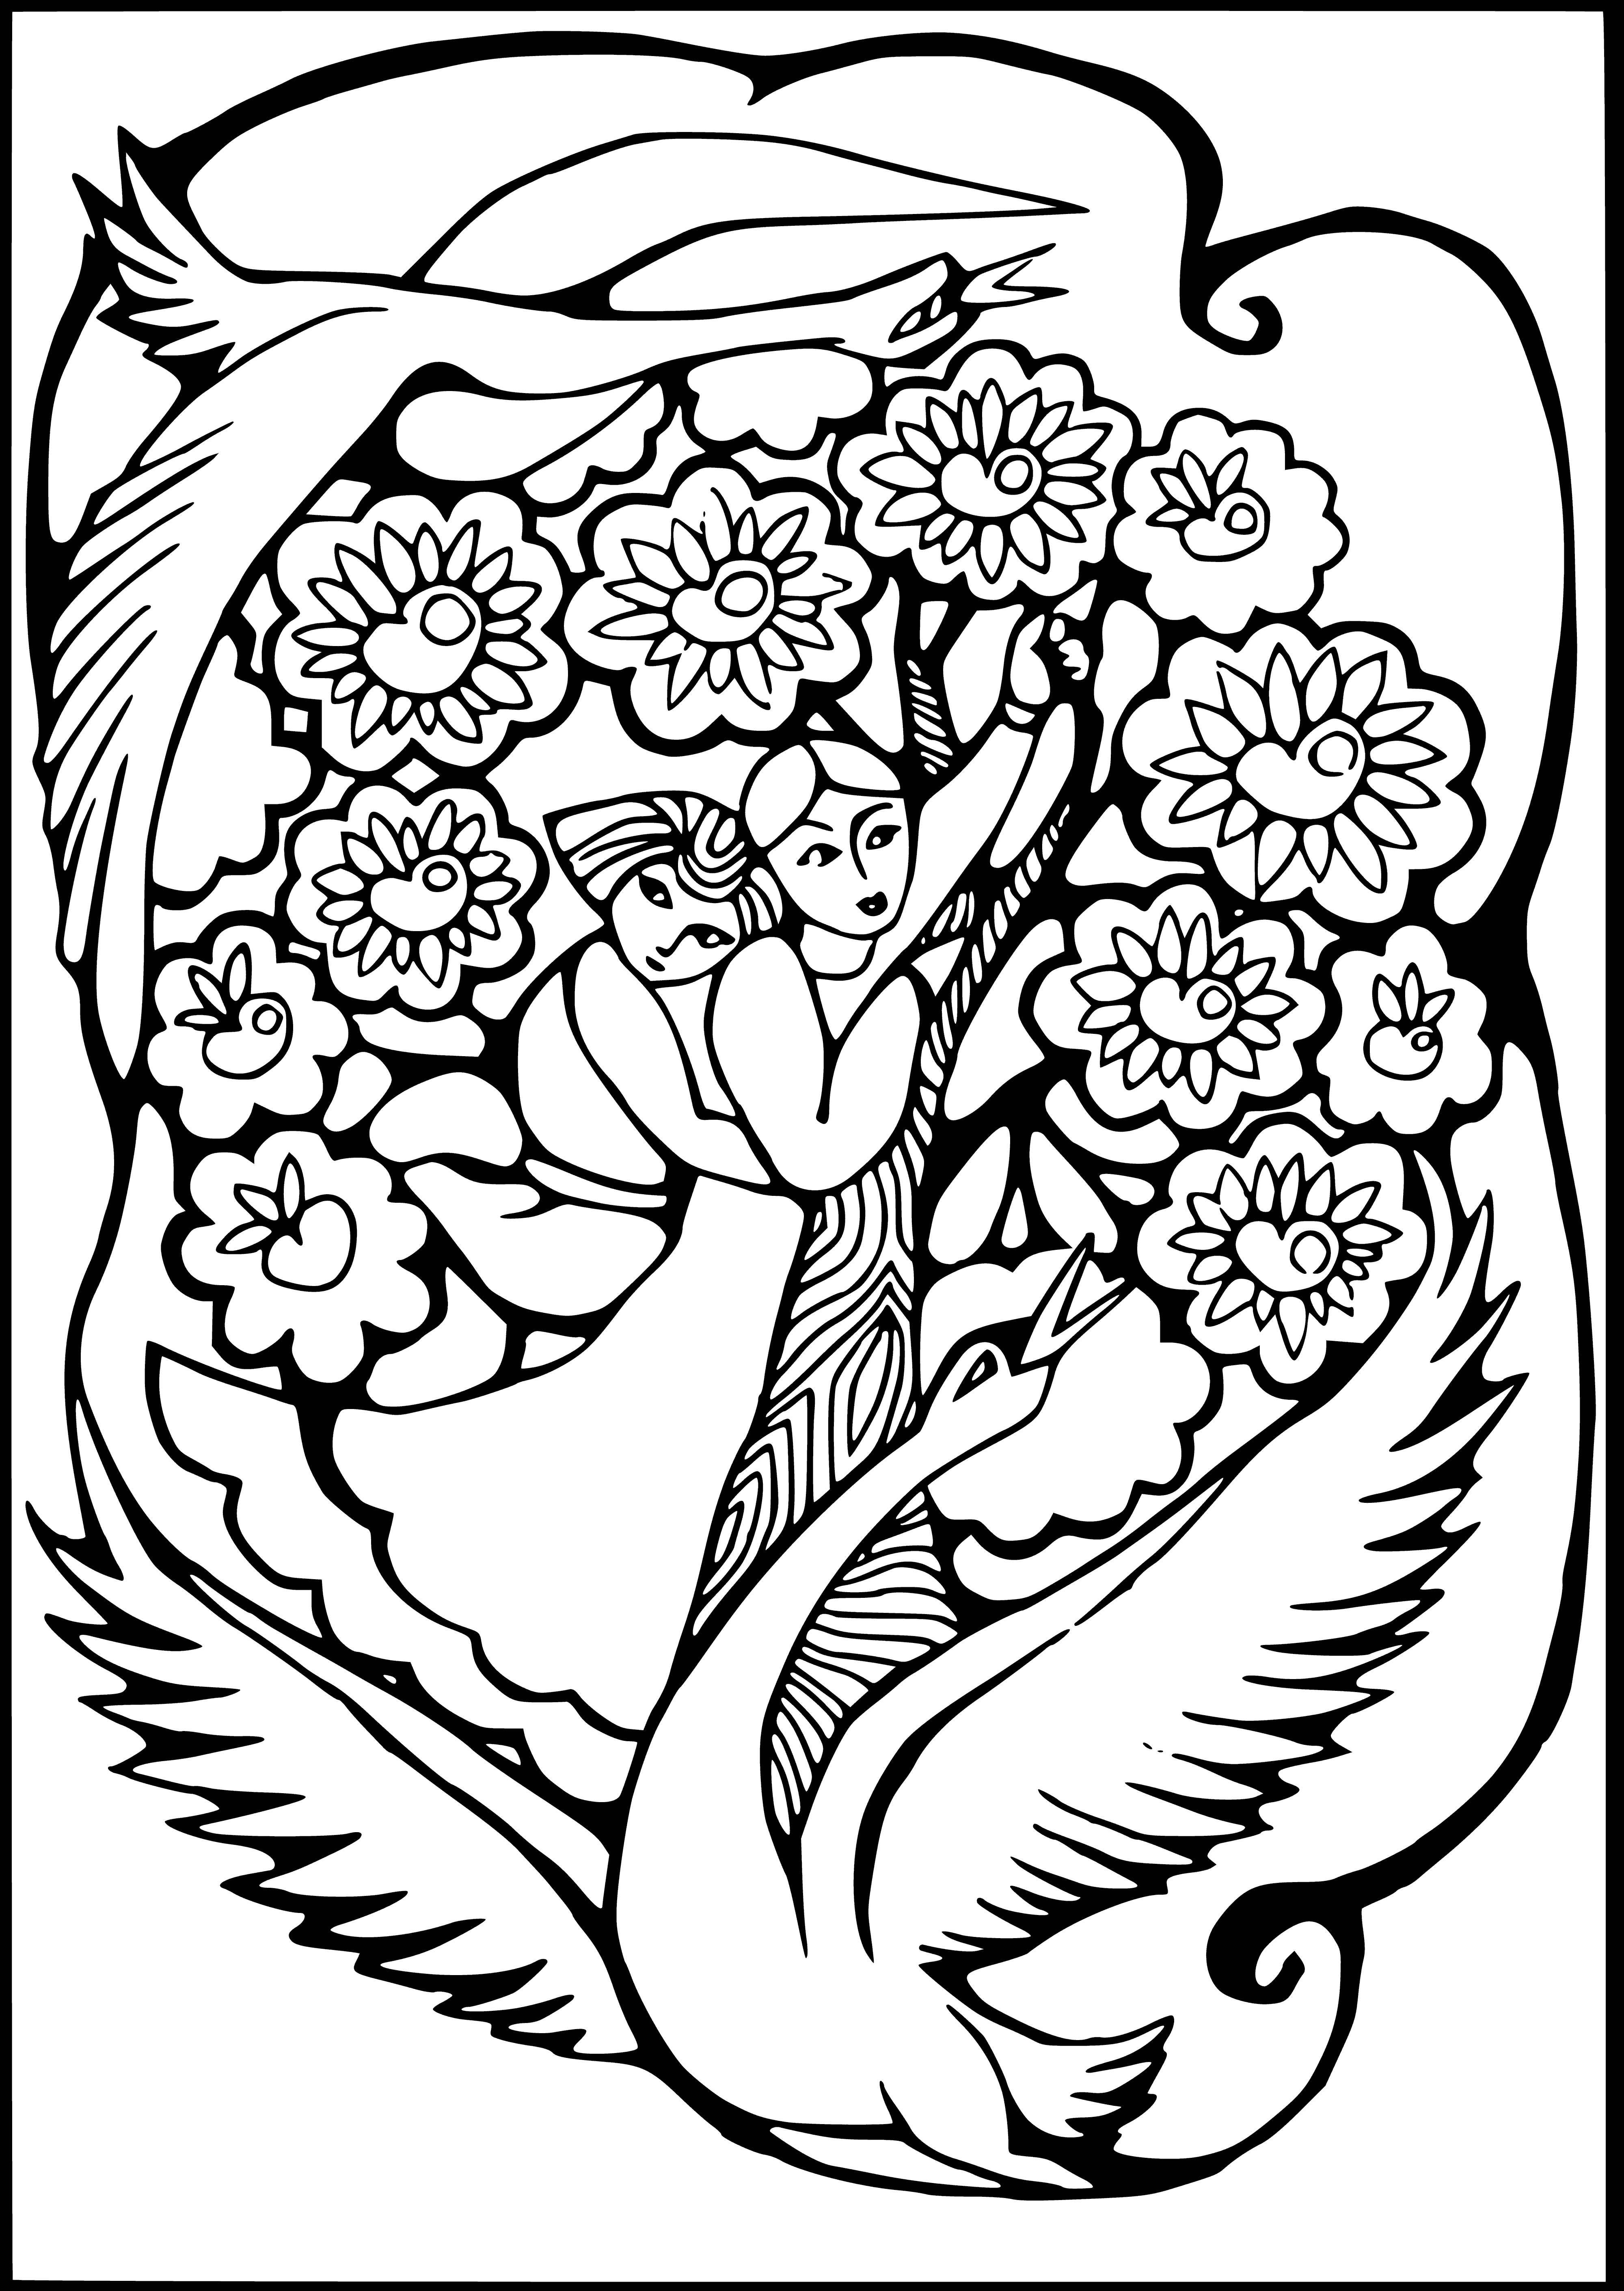 coloring page: Kids climb an apple tree and are held up by it, laughing happily in a beautiful green field, with a blue sky above.